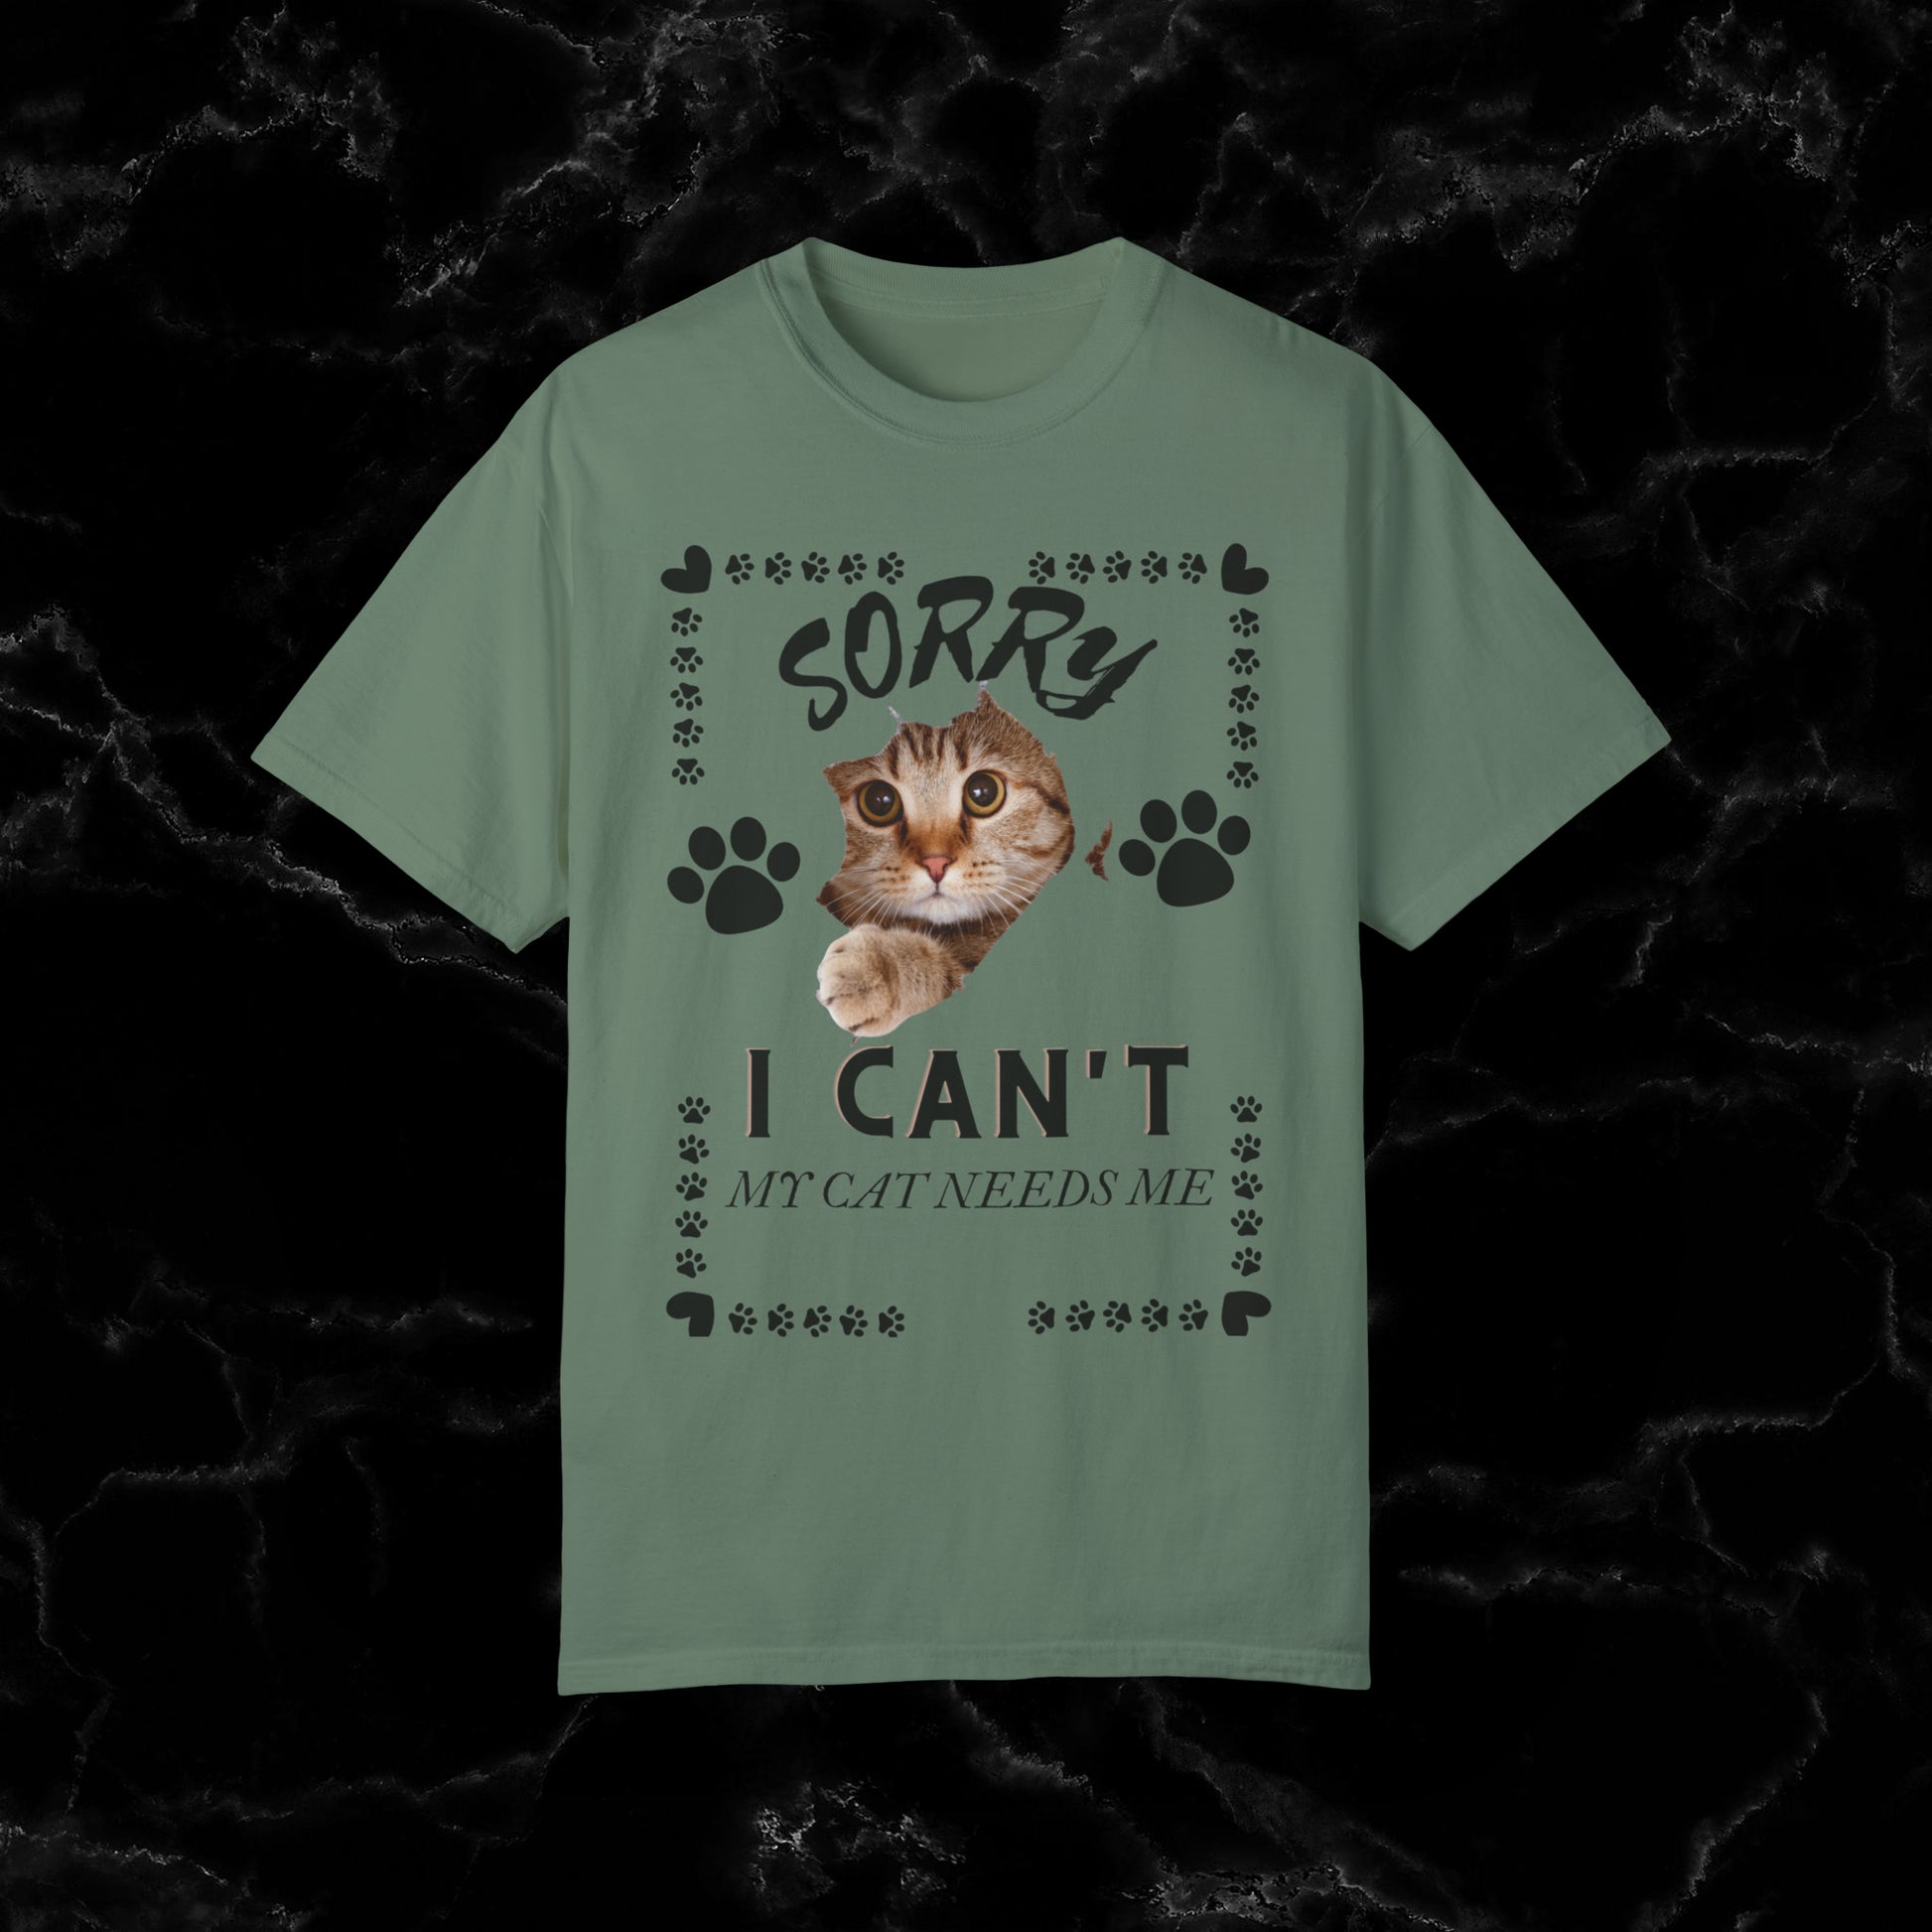 Sorry I Can't, My Cat Needs Me T-Shirt - Perfect Gift for Cat Moms and Animal Lovers T-Shirt Light Green S 